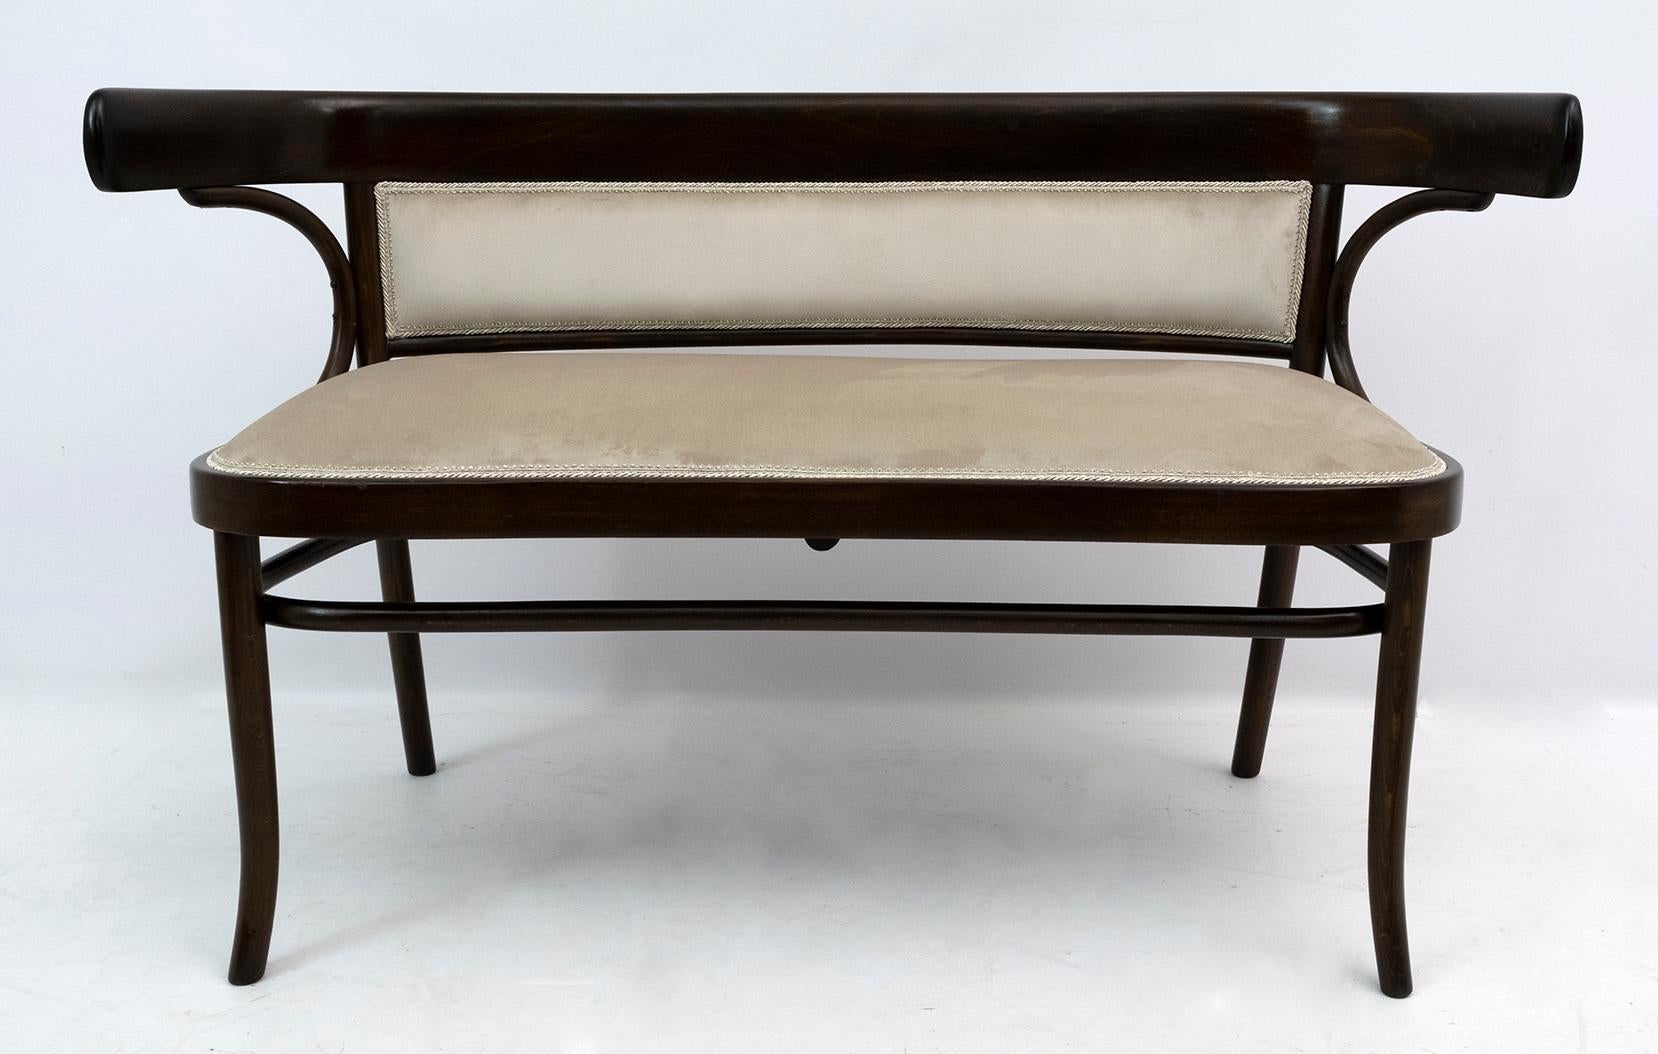 Thonet Austrian two-seater sofa, 1900/1920 c., In bent beech wood, the upholstery has been redone in ivory velvet and the wooden parts have been polished with shellac, respecting their originality.